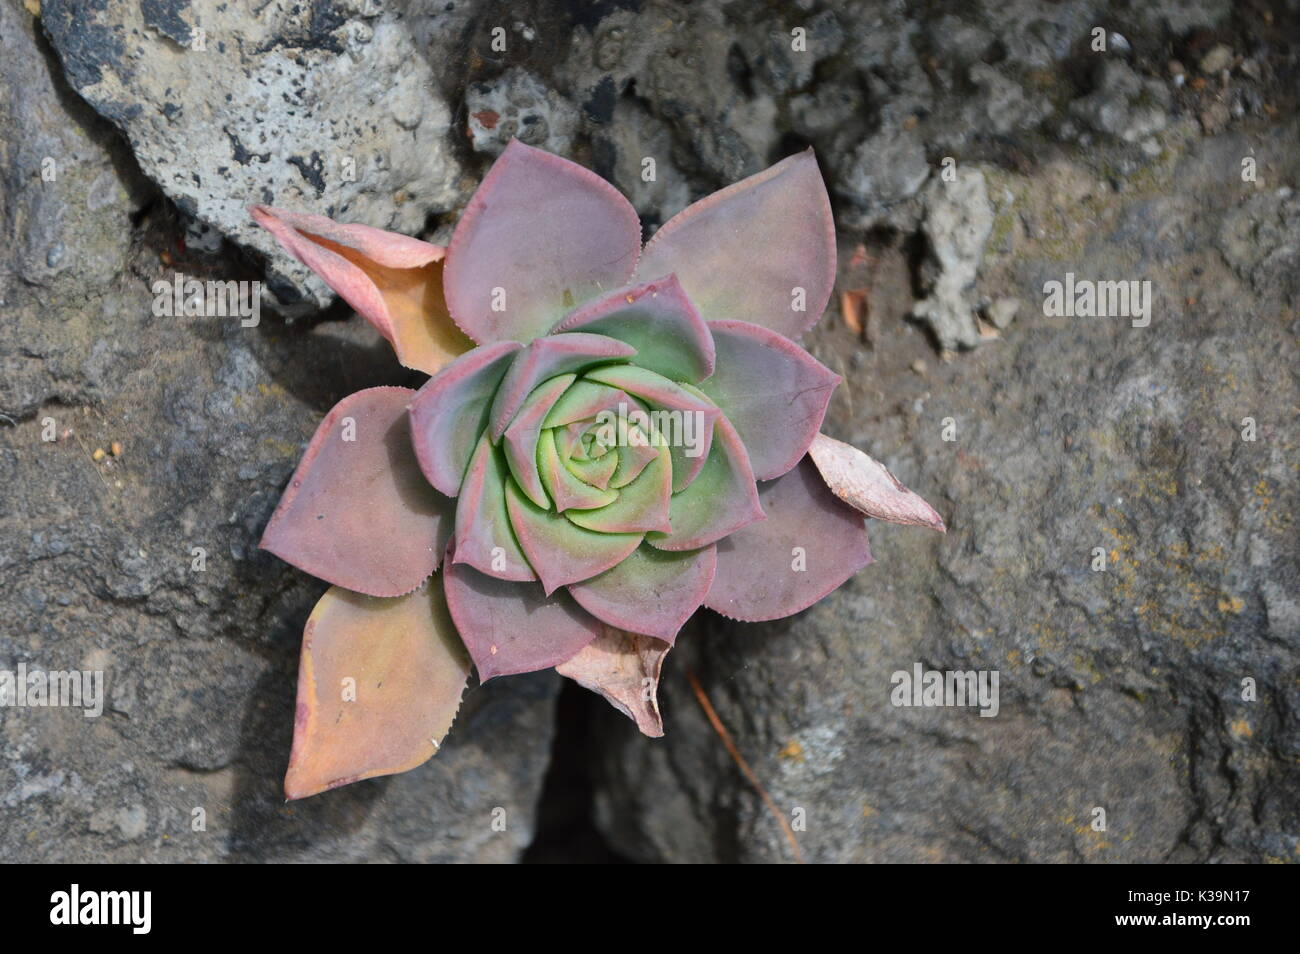 Rock plant (Aeonium) growing from a garden wall in La Palma, Canary Islands Stock Photo